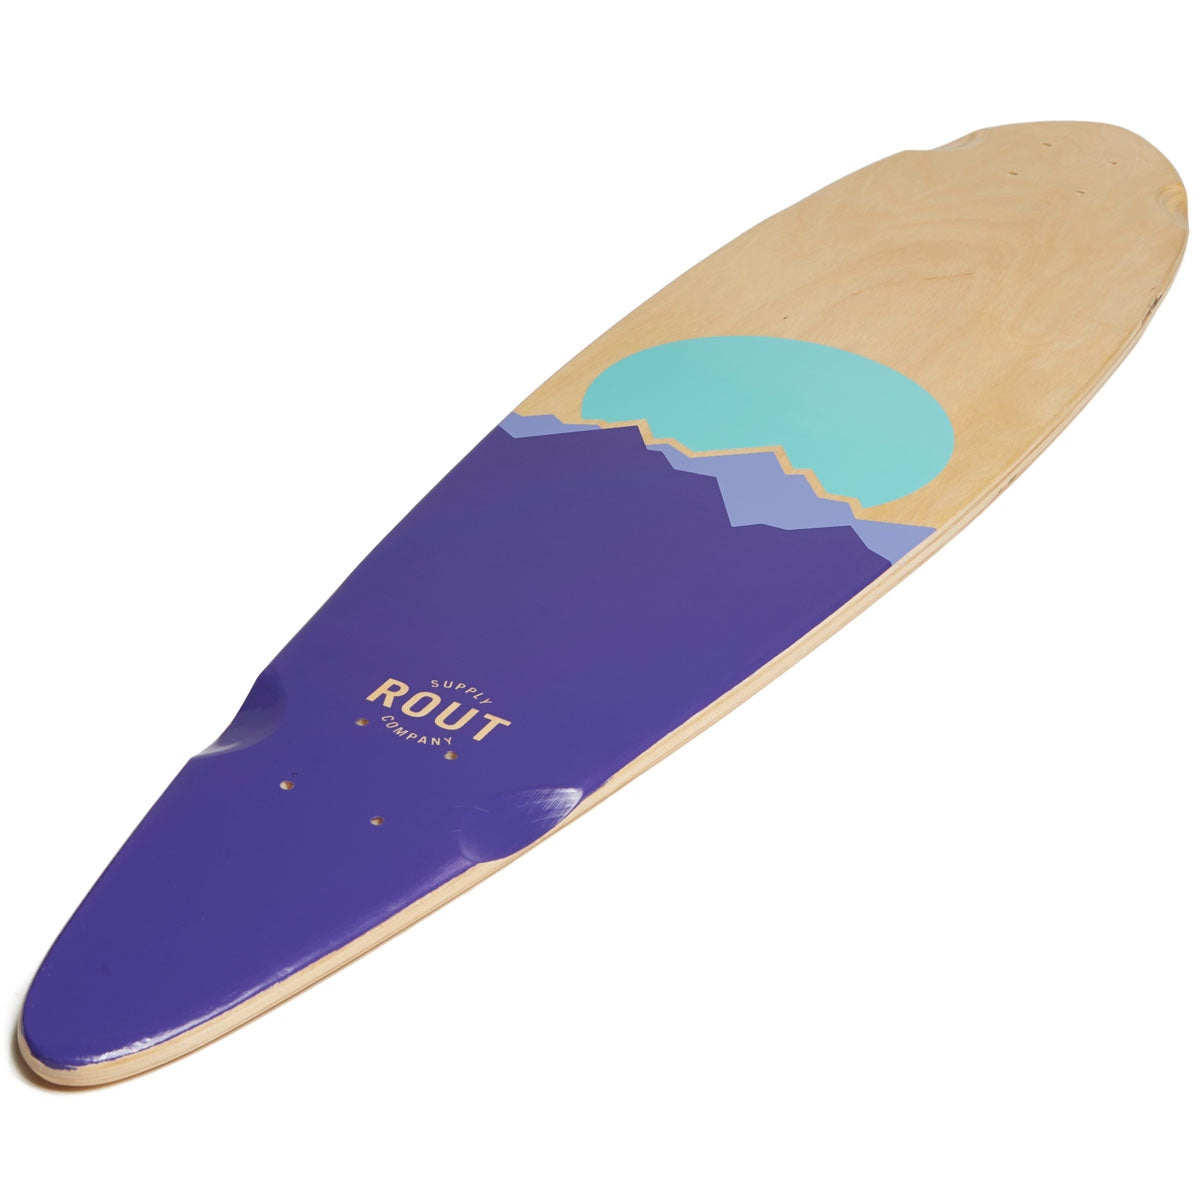 Rout Peaks Pintail Longboard Complete image 4